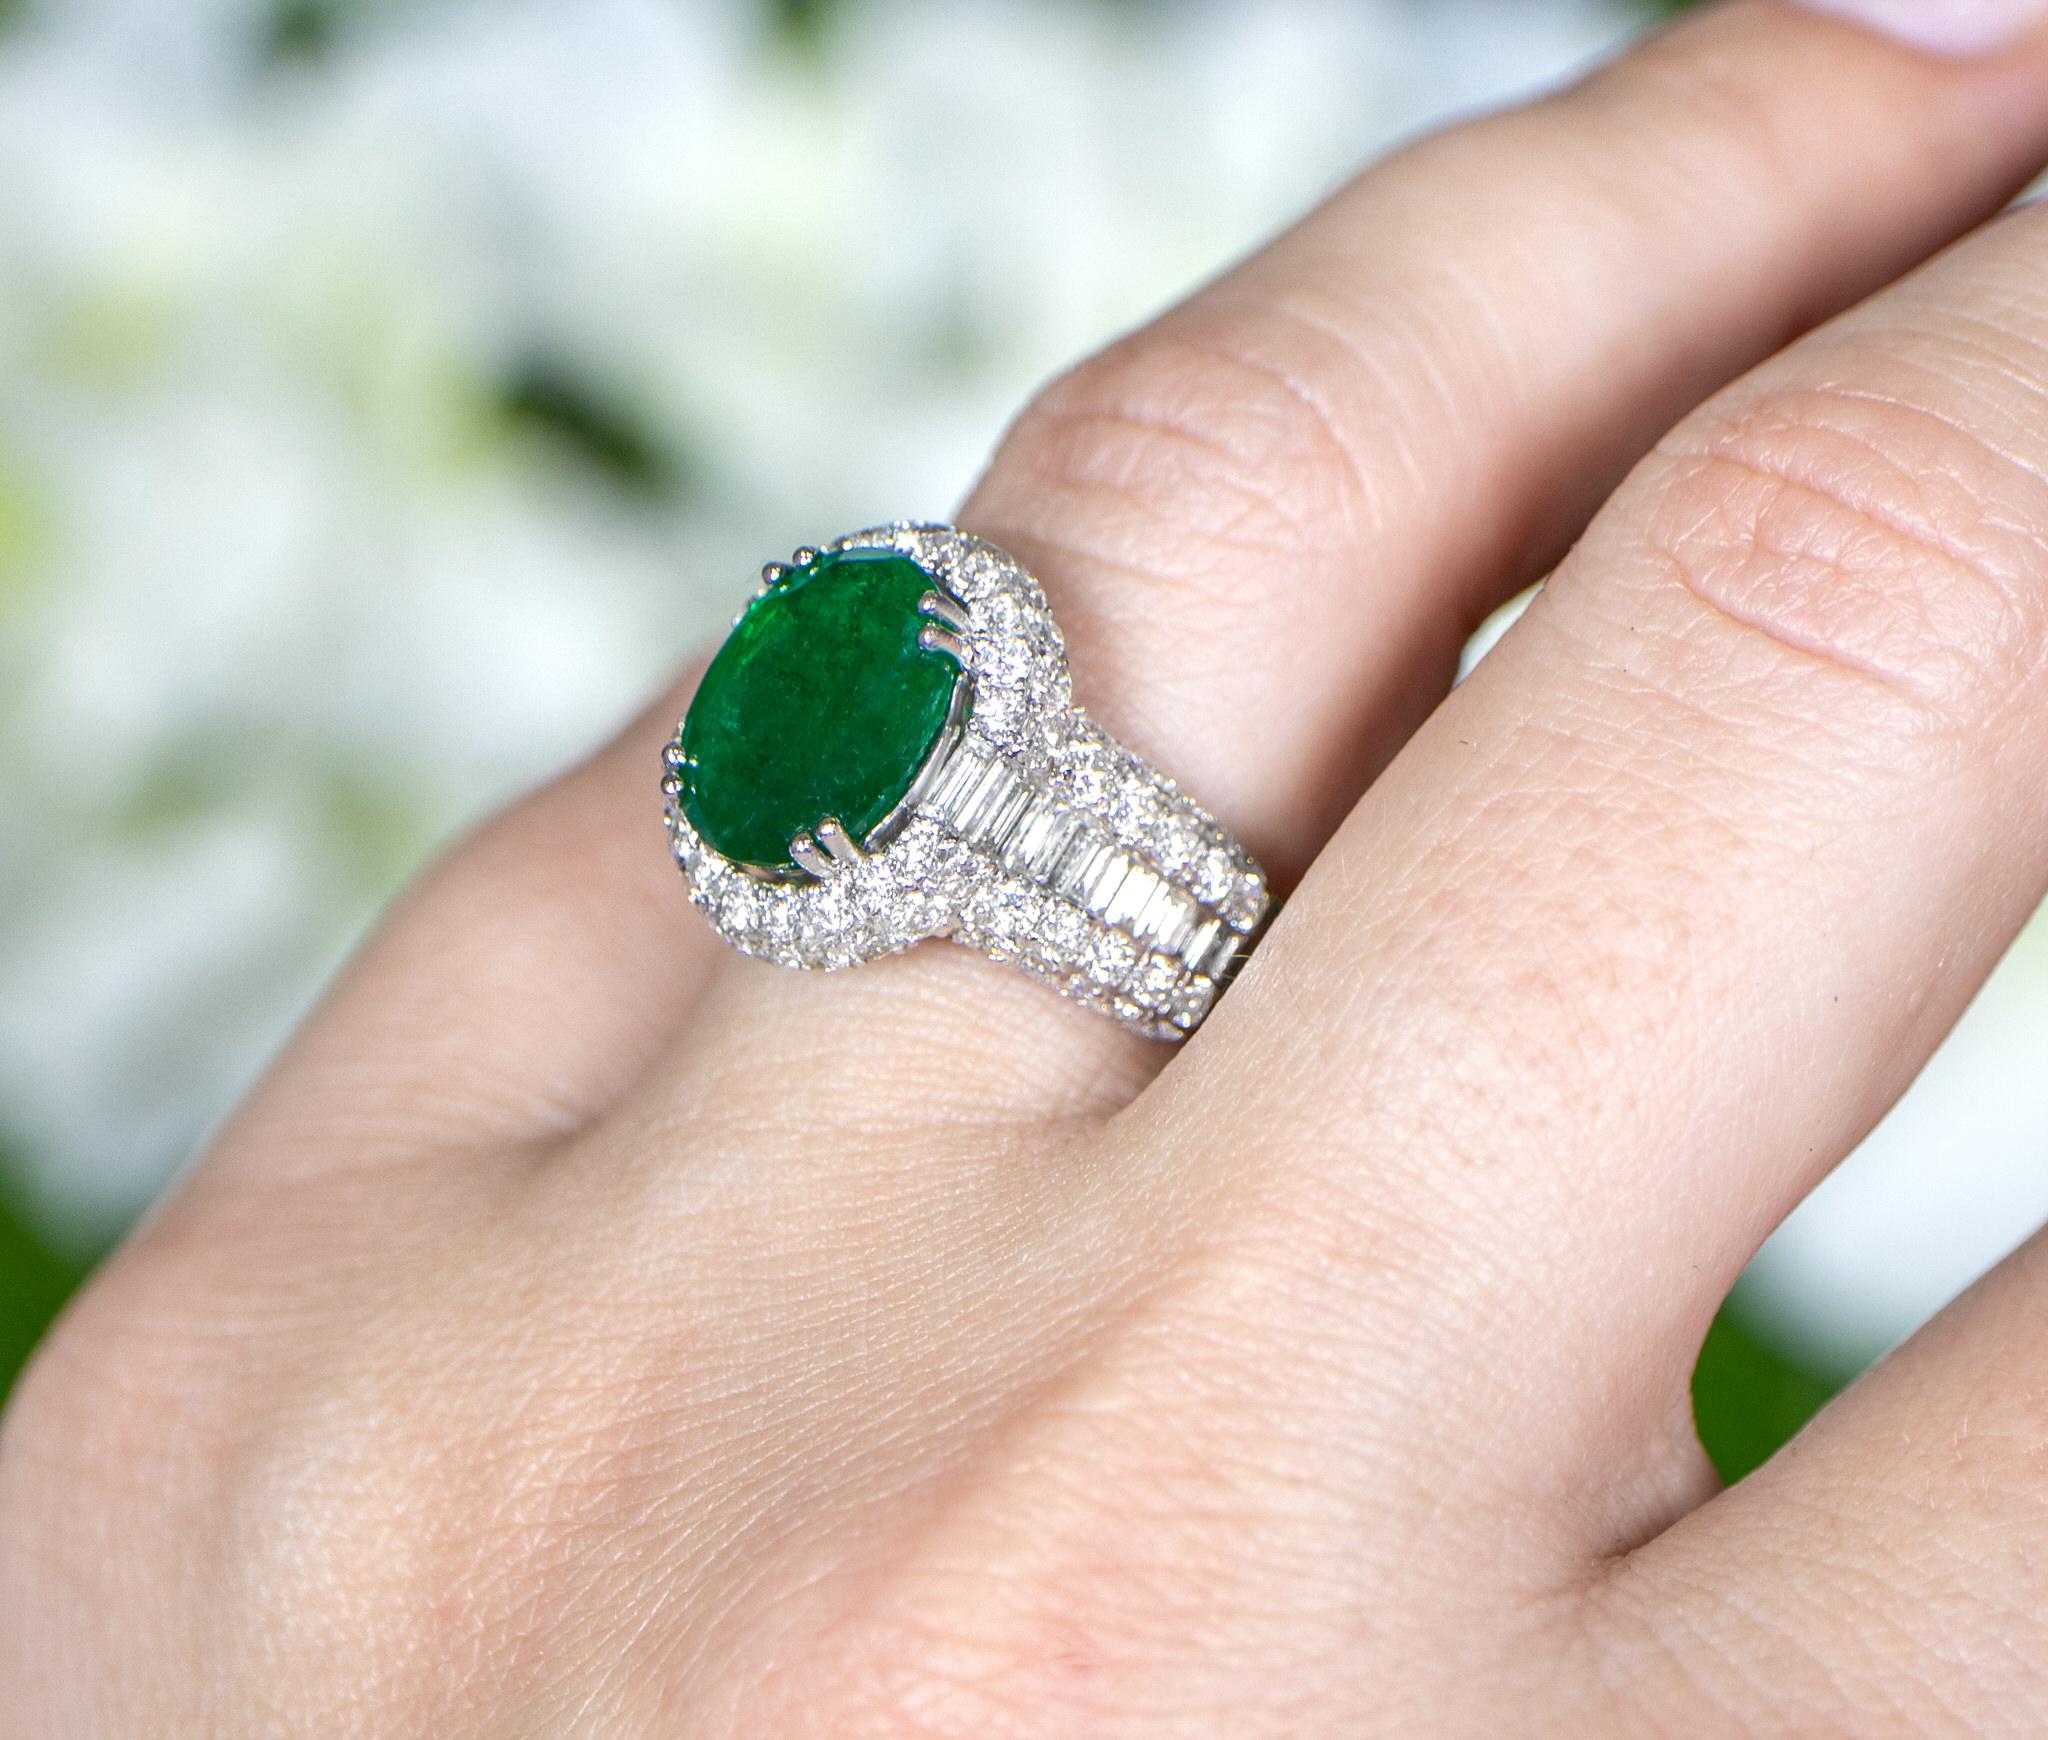 Oval Cut Oval Emerald Statement Ring With Diamond Setting 6.31 Carats 18K Gold For Sale